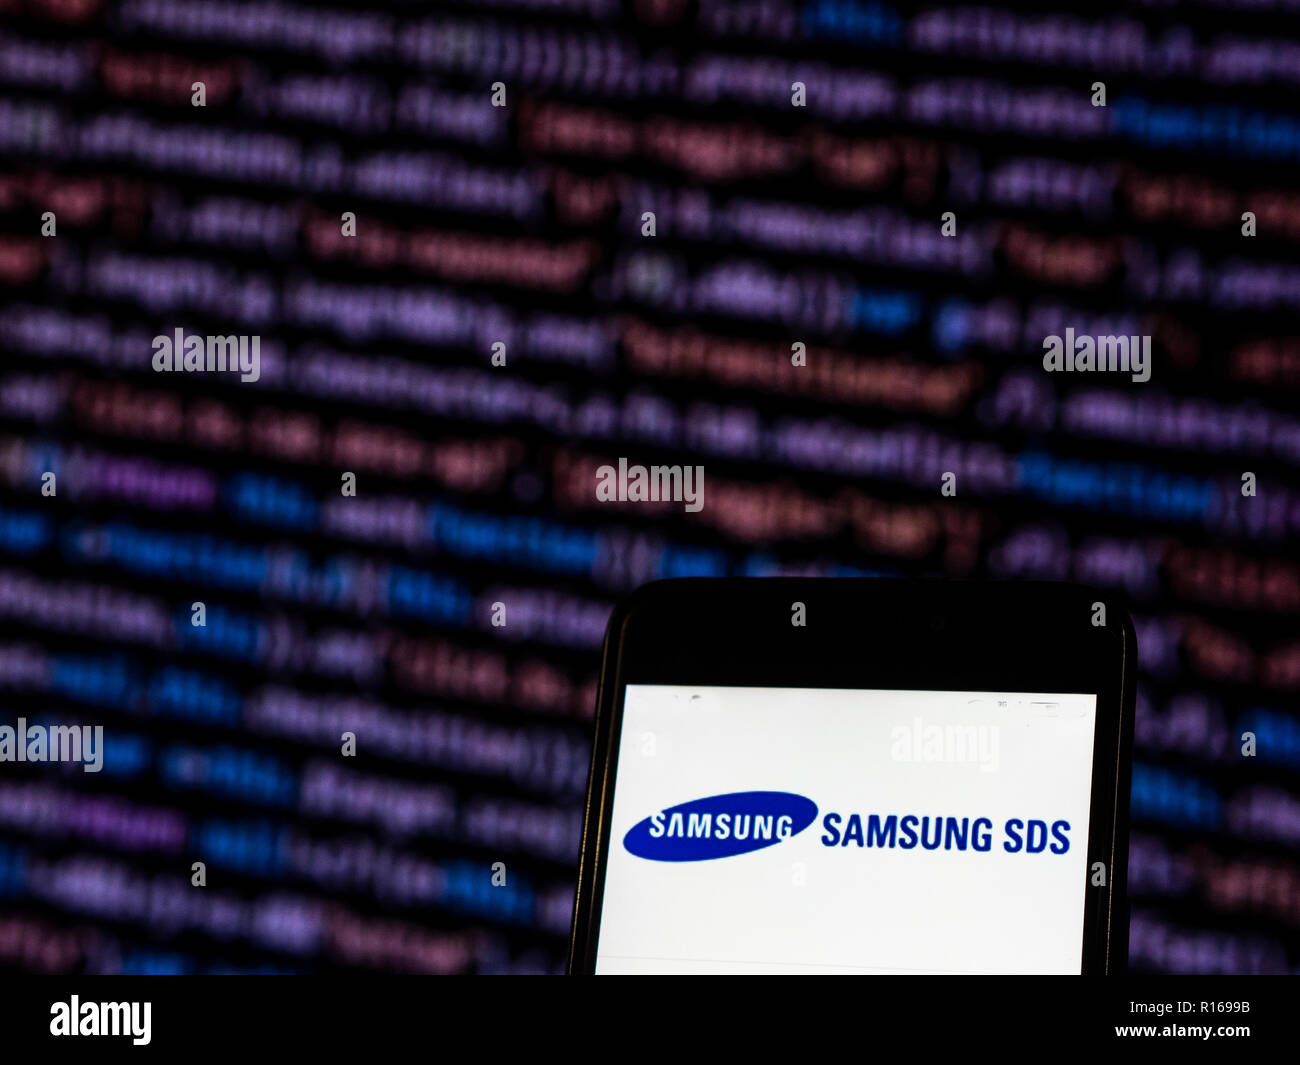 Samsung SDS logo seen displayed on smart phone. Samsung SDS, established in 1985, as a subsidiary of Samsung group has been providing information technology services. These include consulting services; technical services; and outsourcing services. Stock Photo